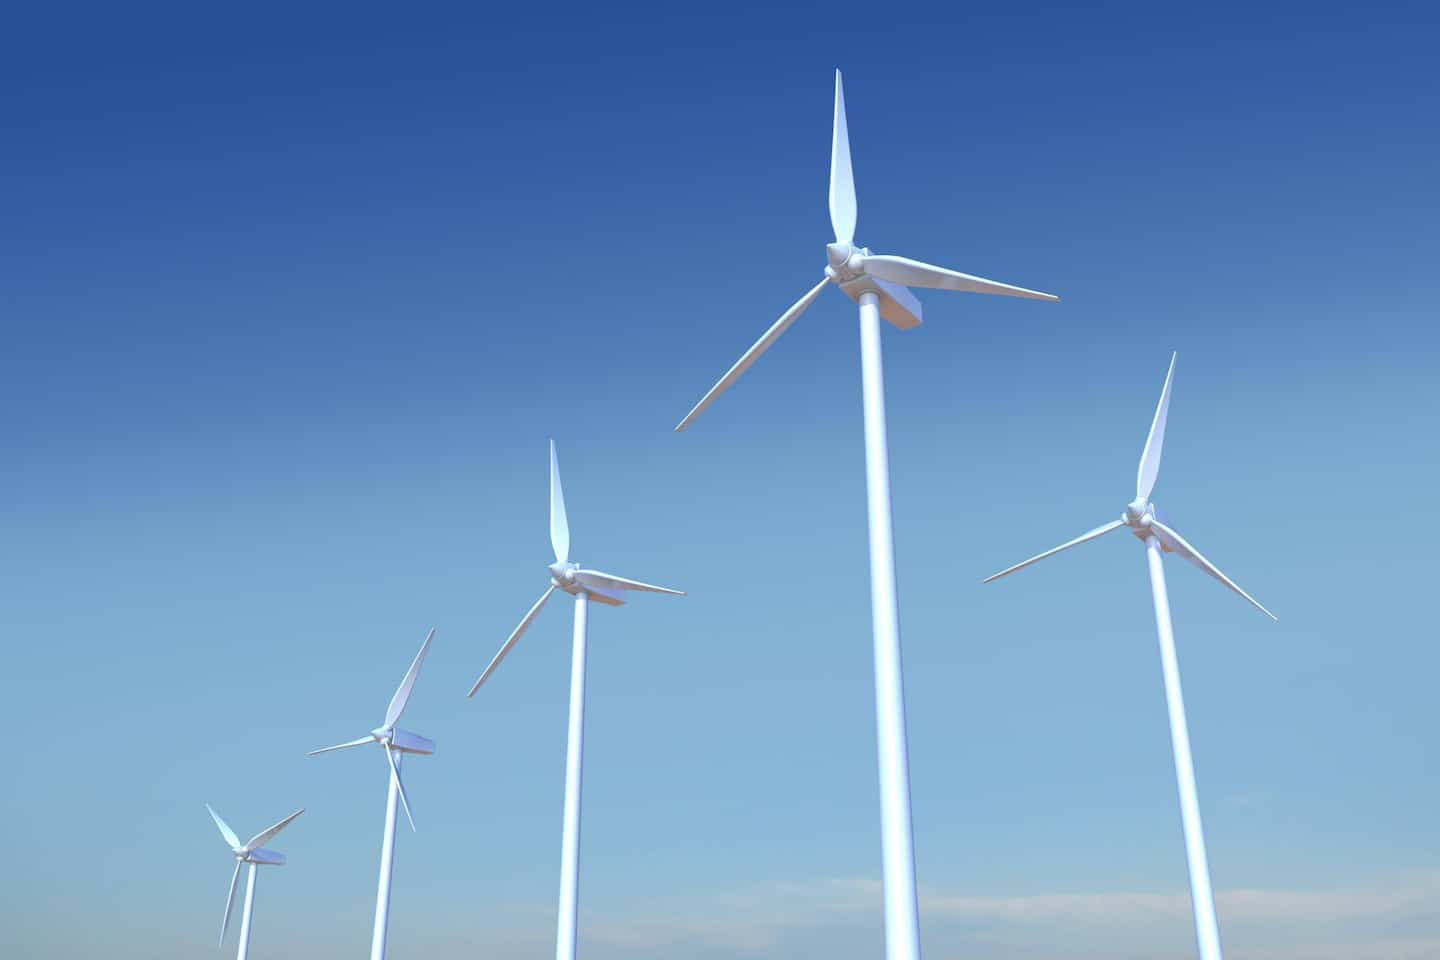 Hydro will have to choose between twenty wind projects